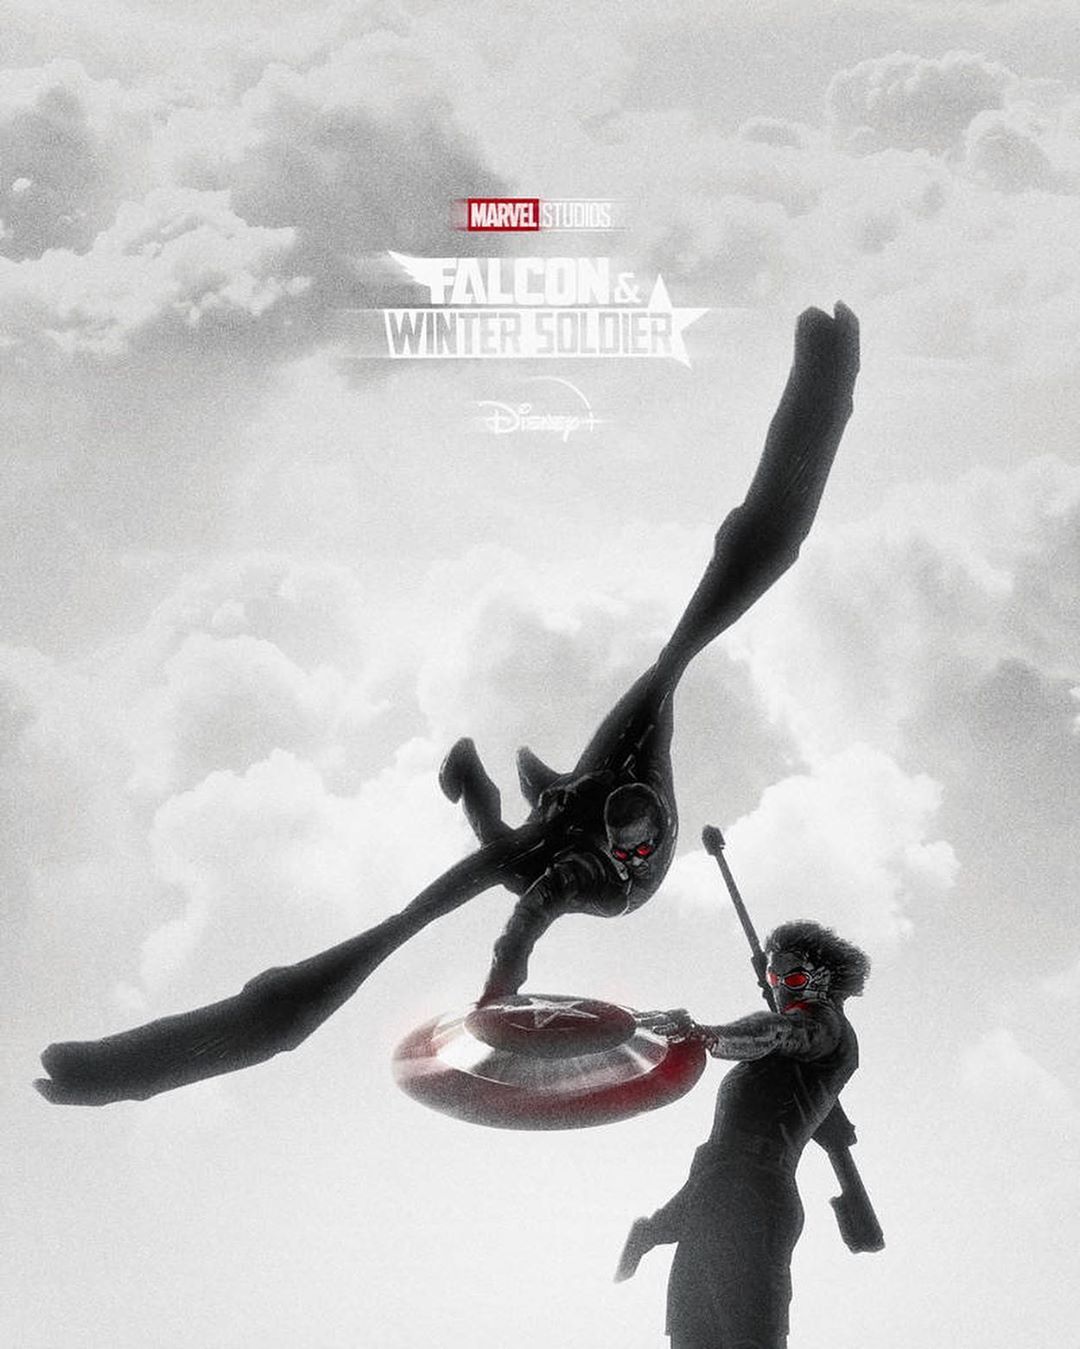 Coming soon. Falcon & Winter Soldier. A show streamed on Disney